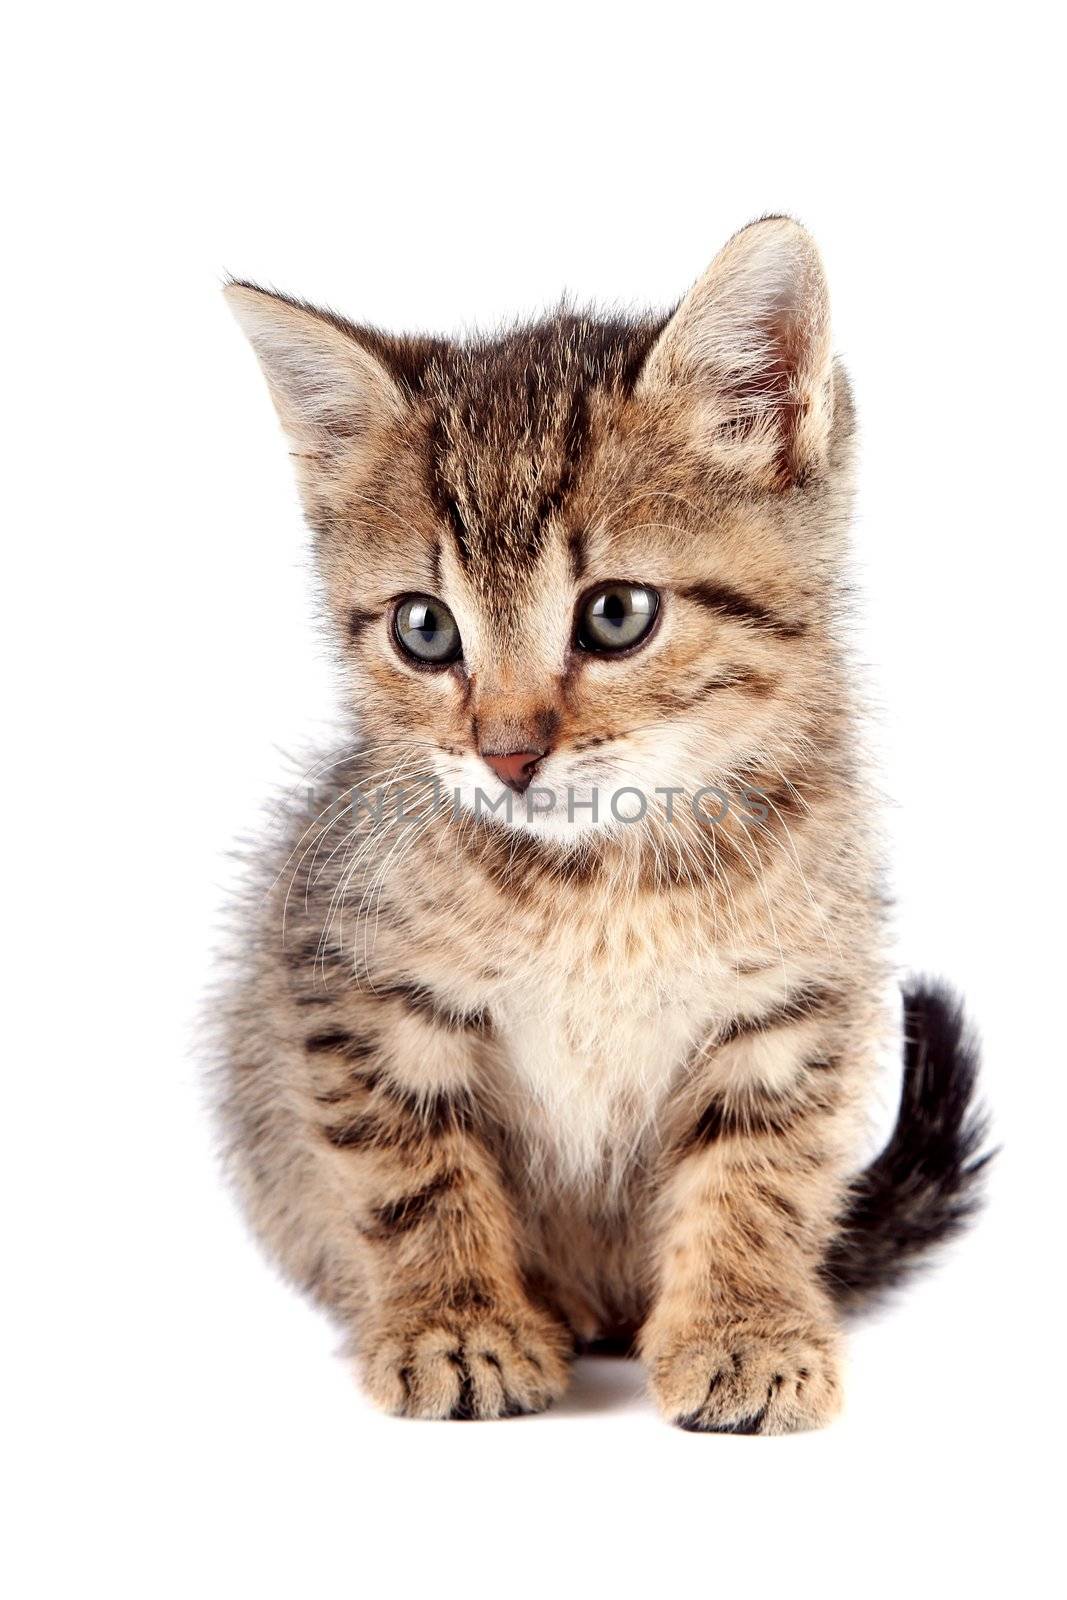 The striped kitten sits on a white background